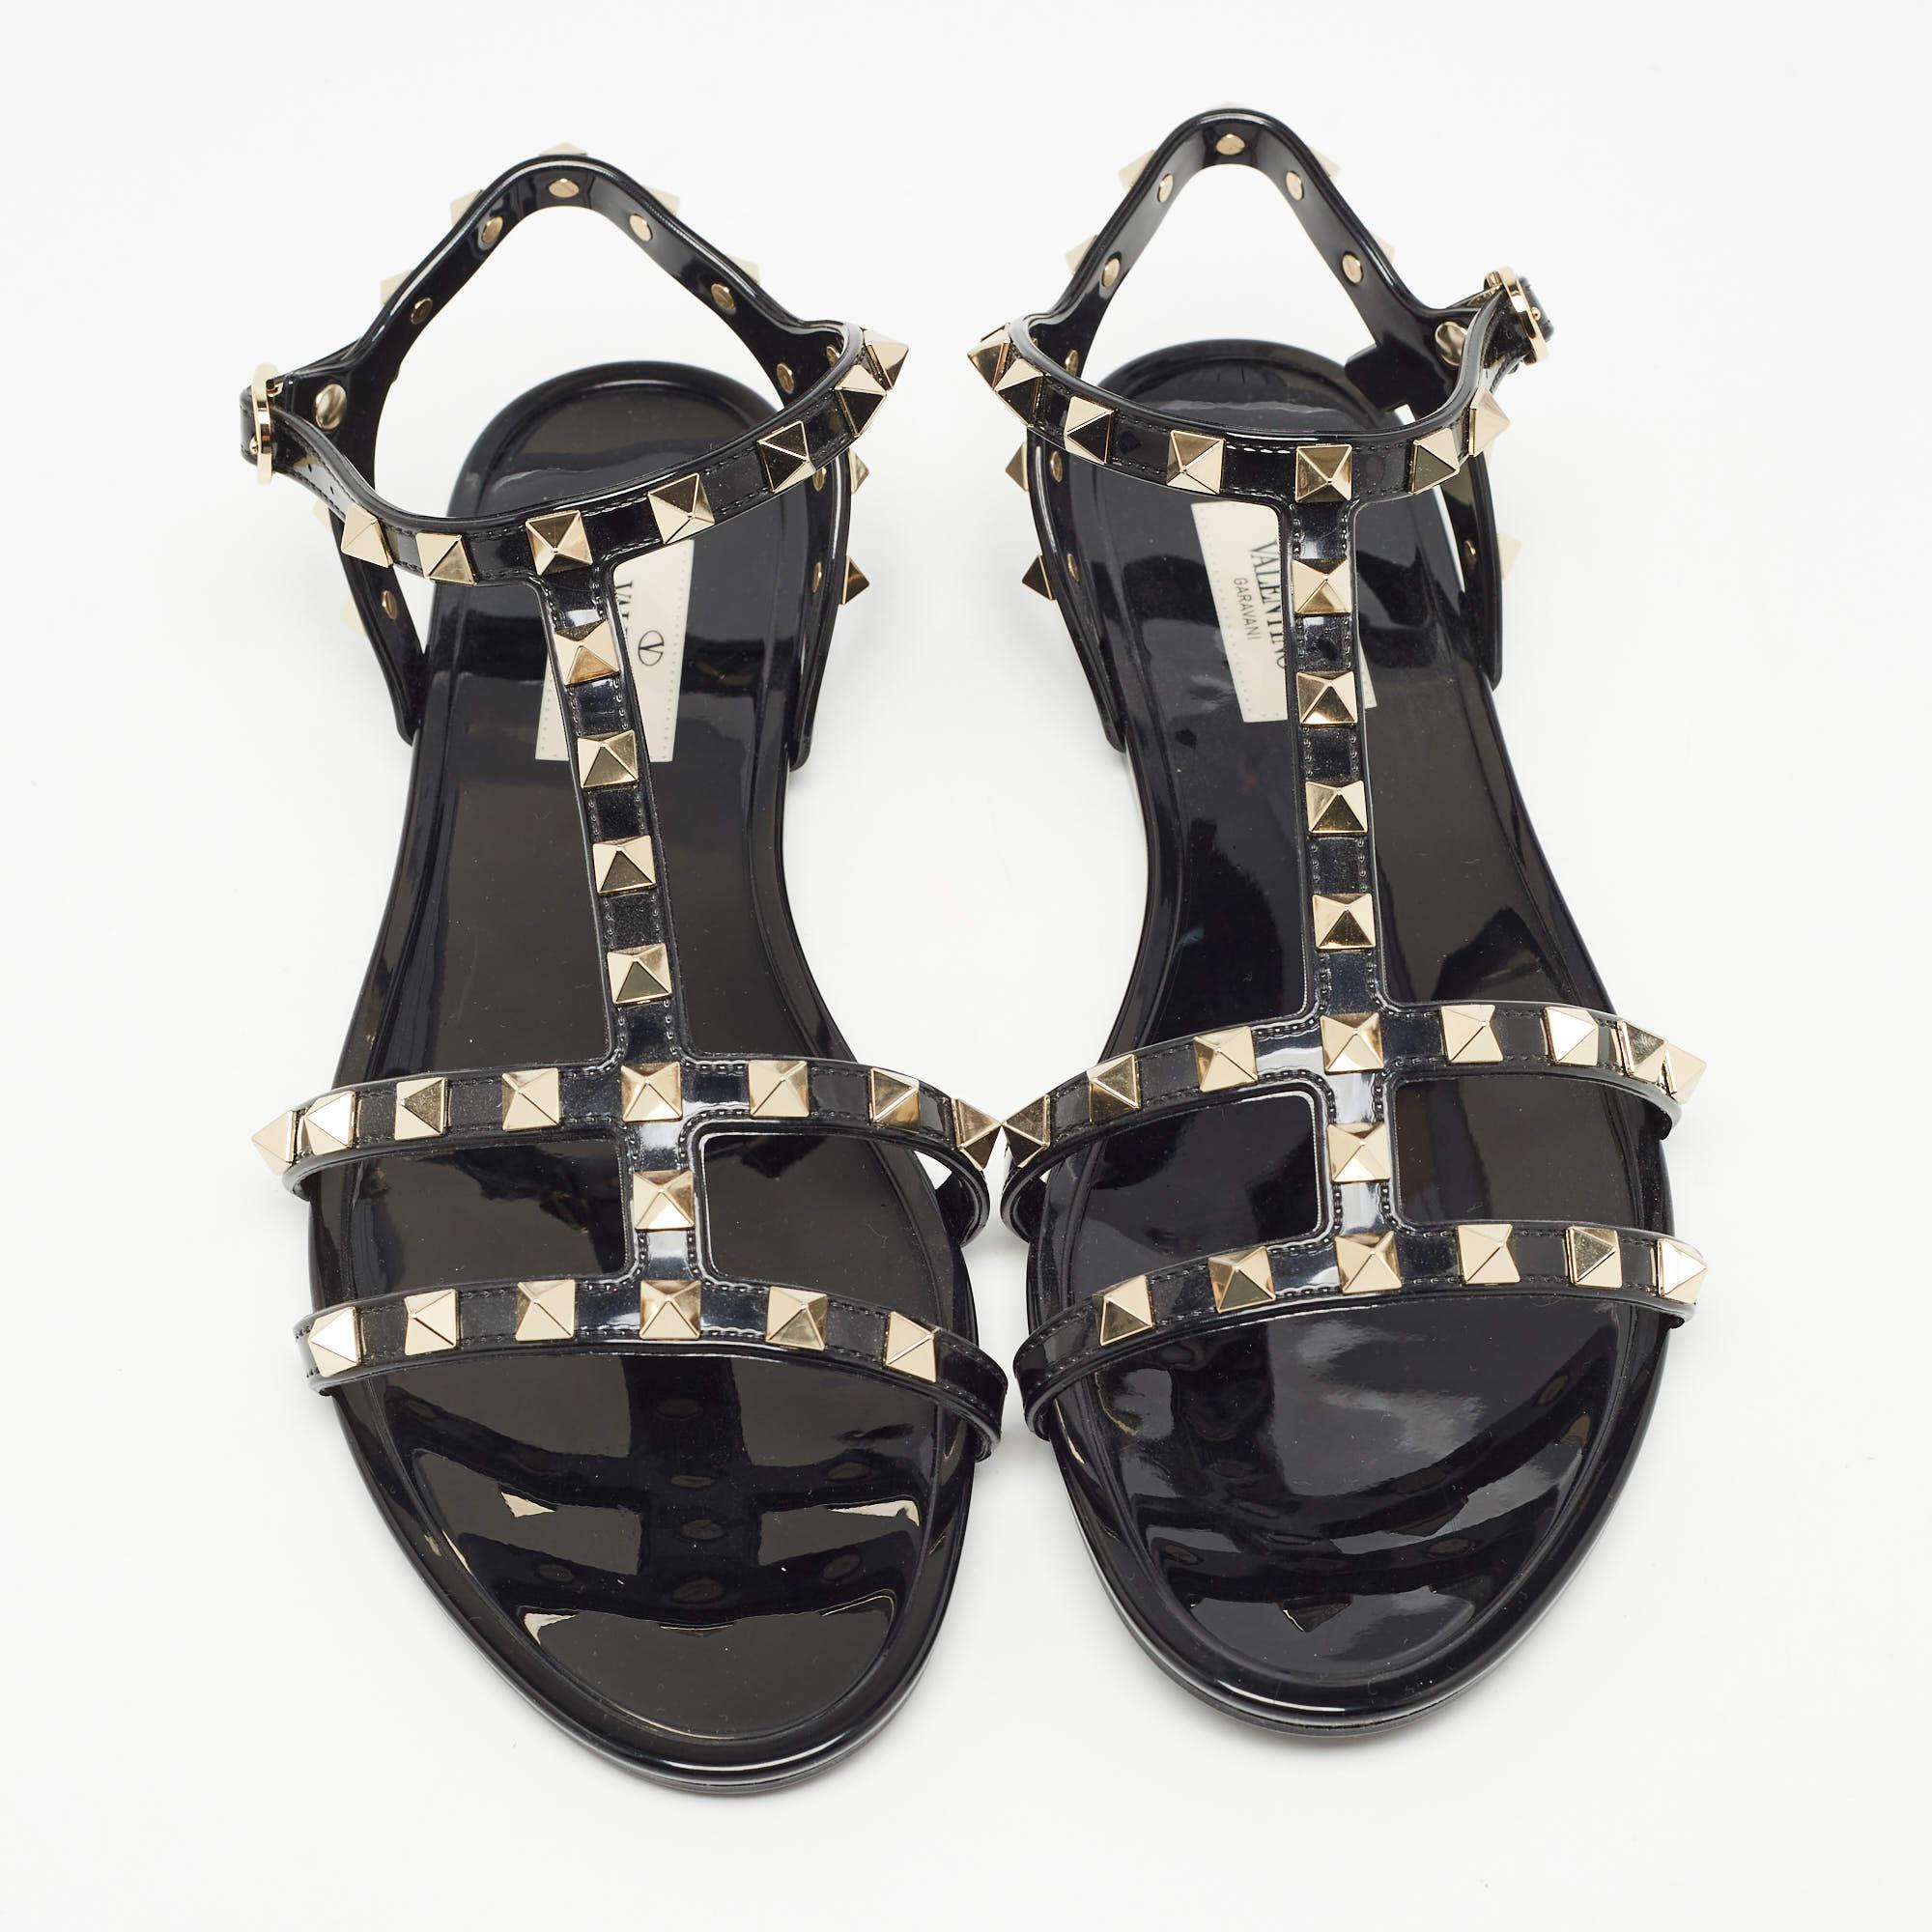 With meticulous craftsmanship and glamorous details, this Valentino pair of flats reflects the brand's expertise in creating innovative and admirable designs. The Rockstuds elegantly outlines the upper straps and make it undeniably chic. Created